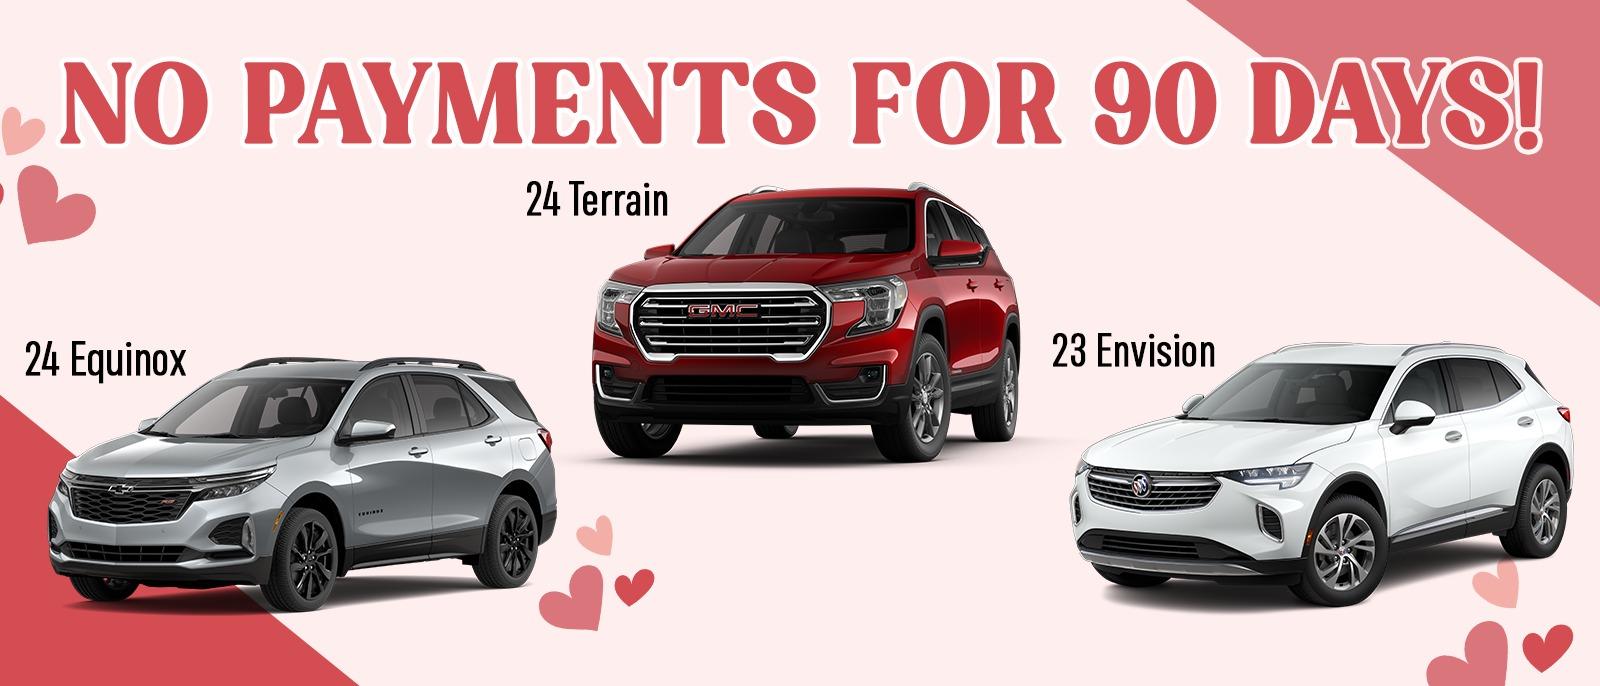 NO PAYMENTS FOR 90 DAYS! 24 Terrain 24 Equinox 23 Envision